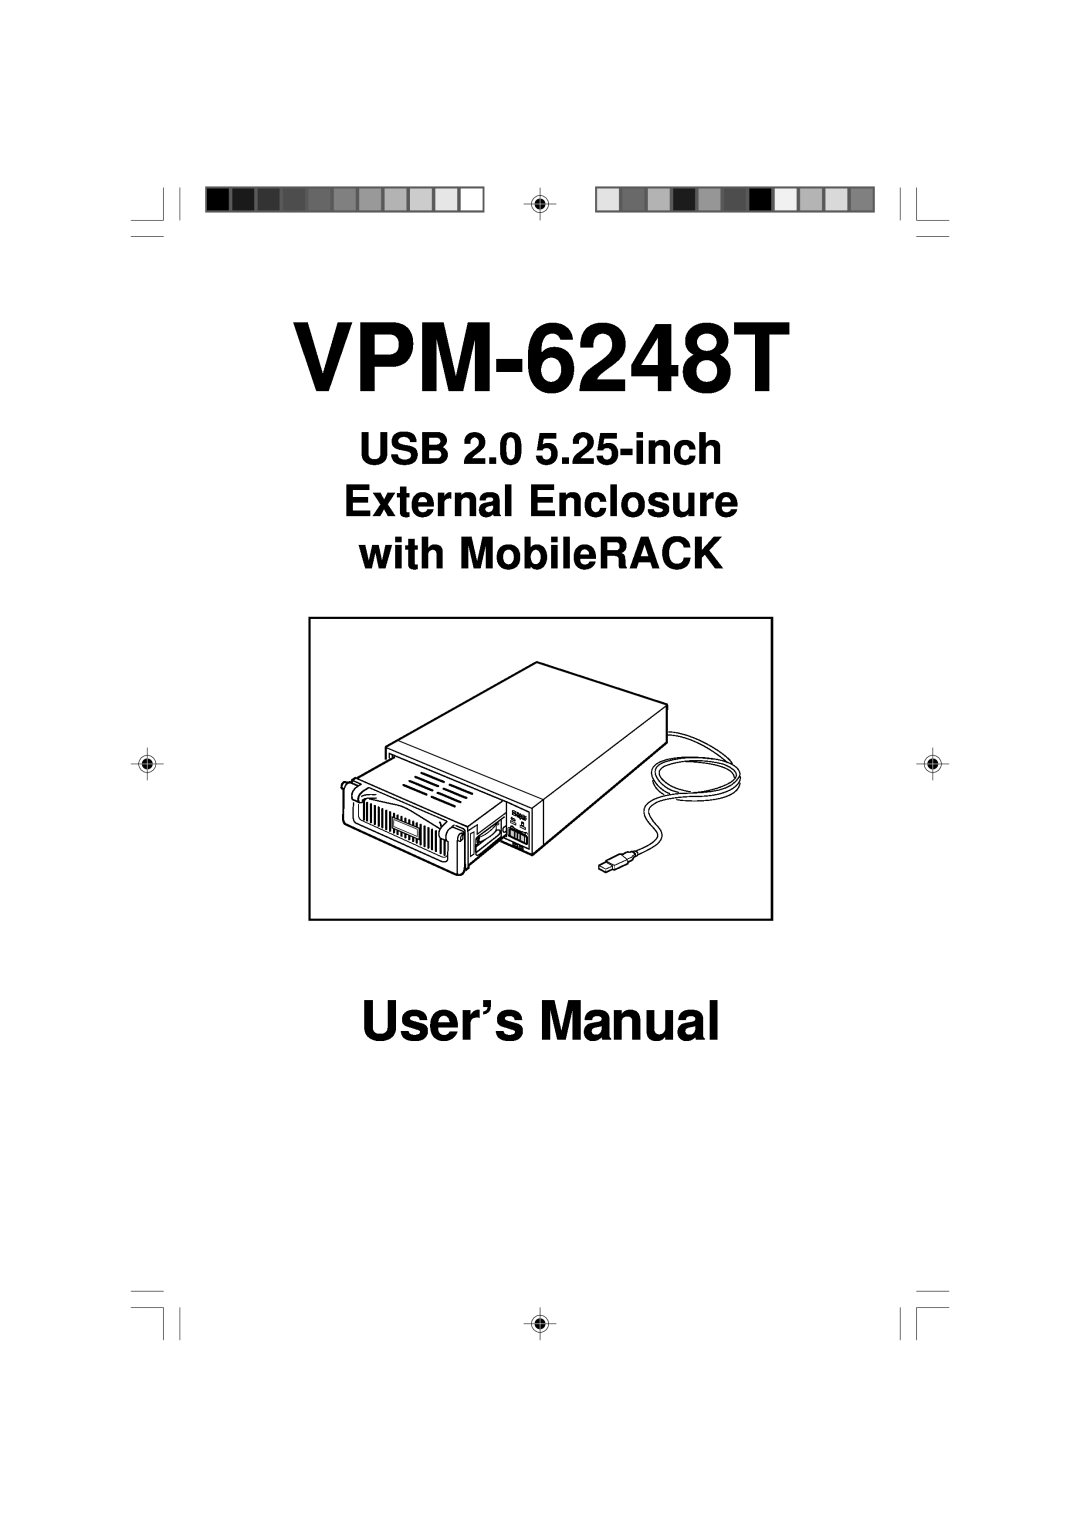 VIPowER VPM-6248T user manual User’s Manual, USB 2.0 5.25-inch External Enclosure with MobileRACK 